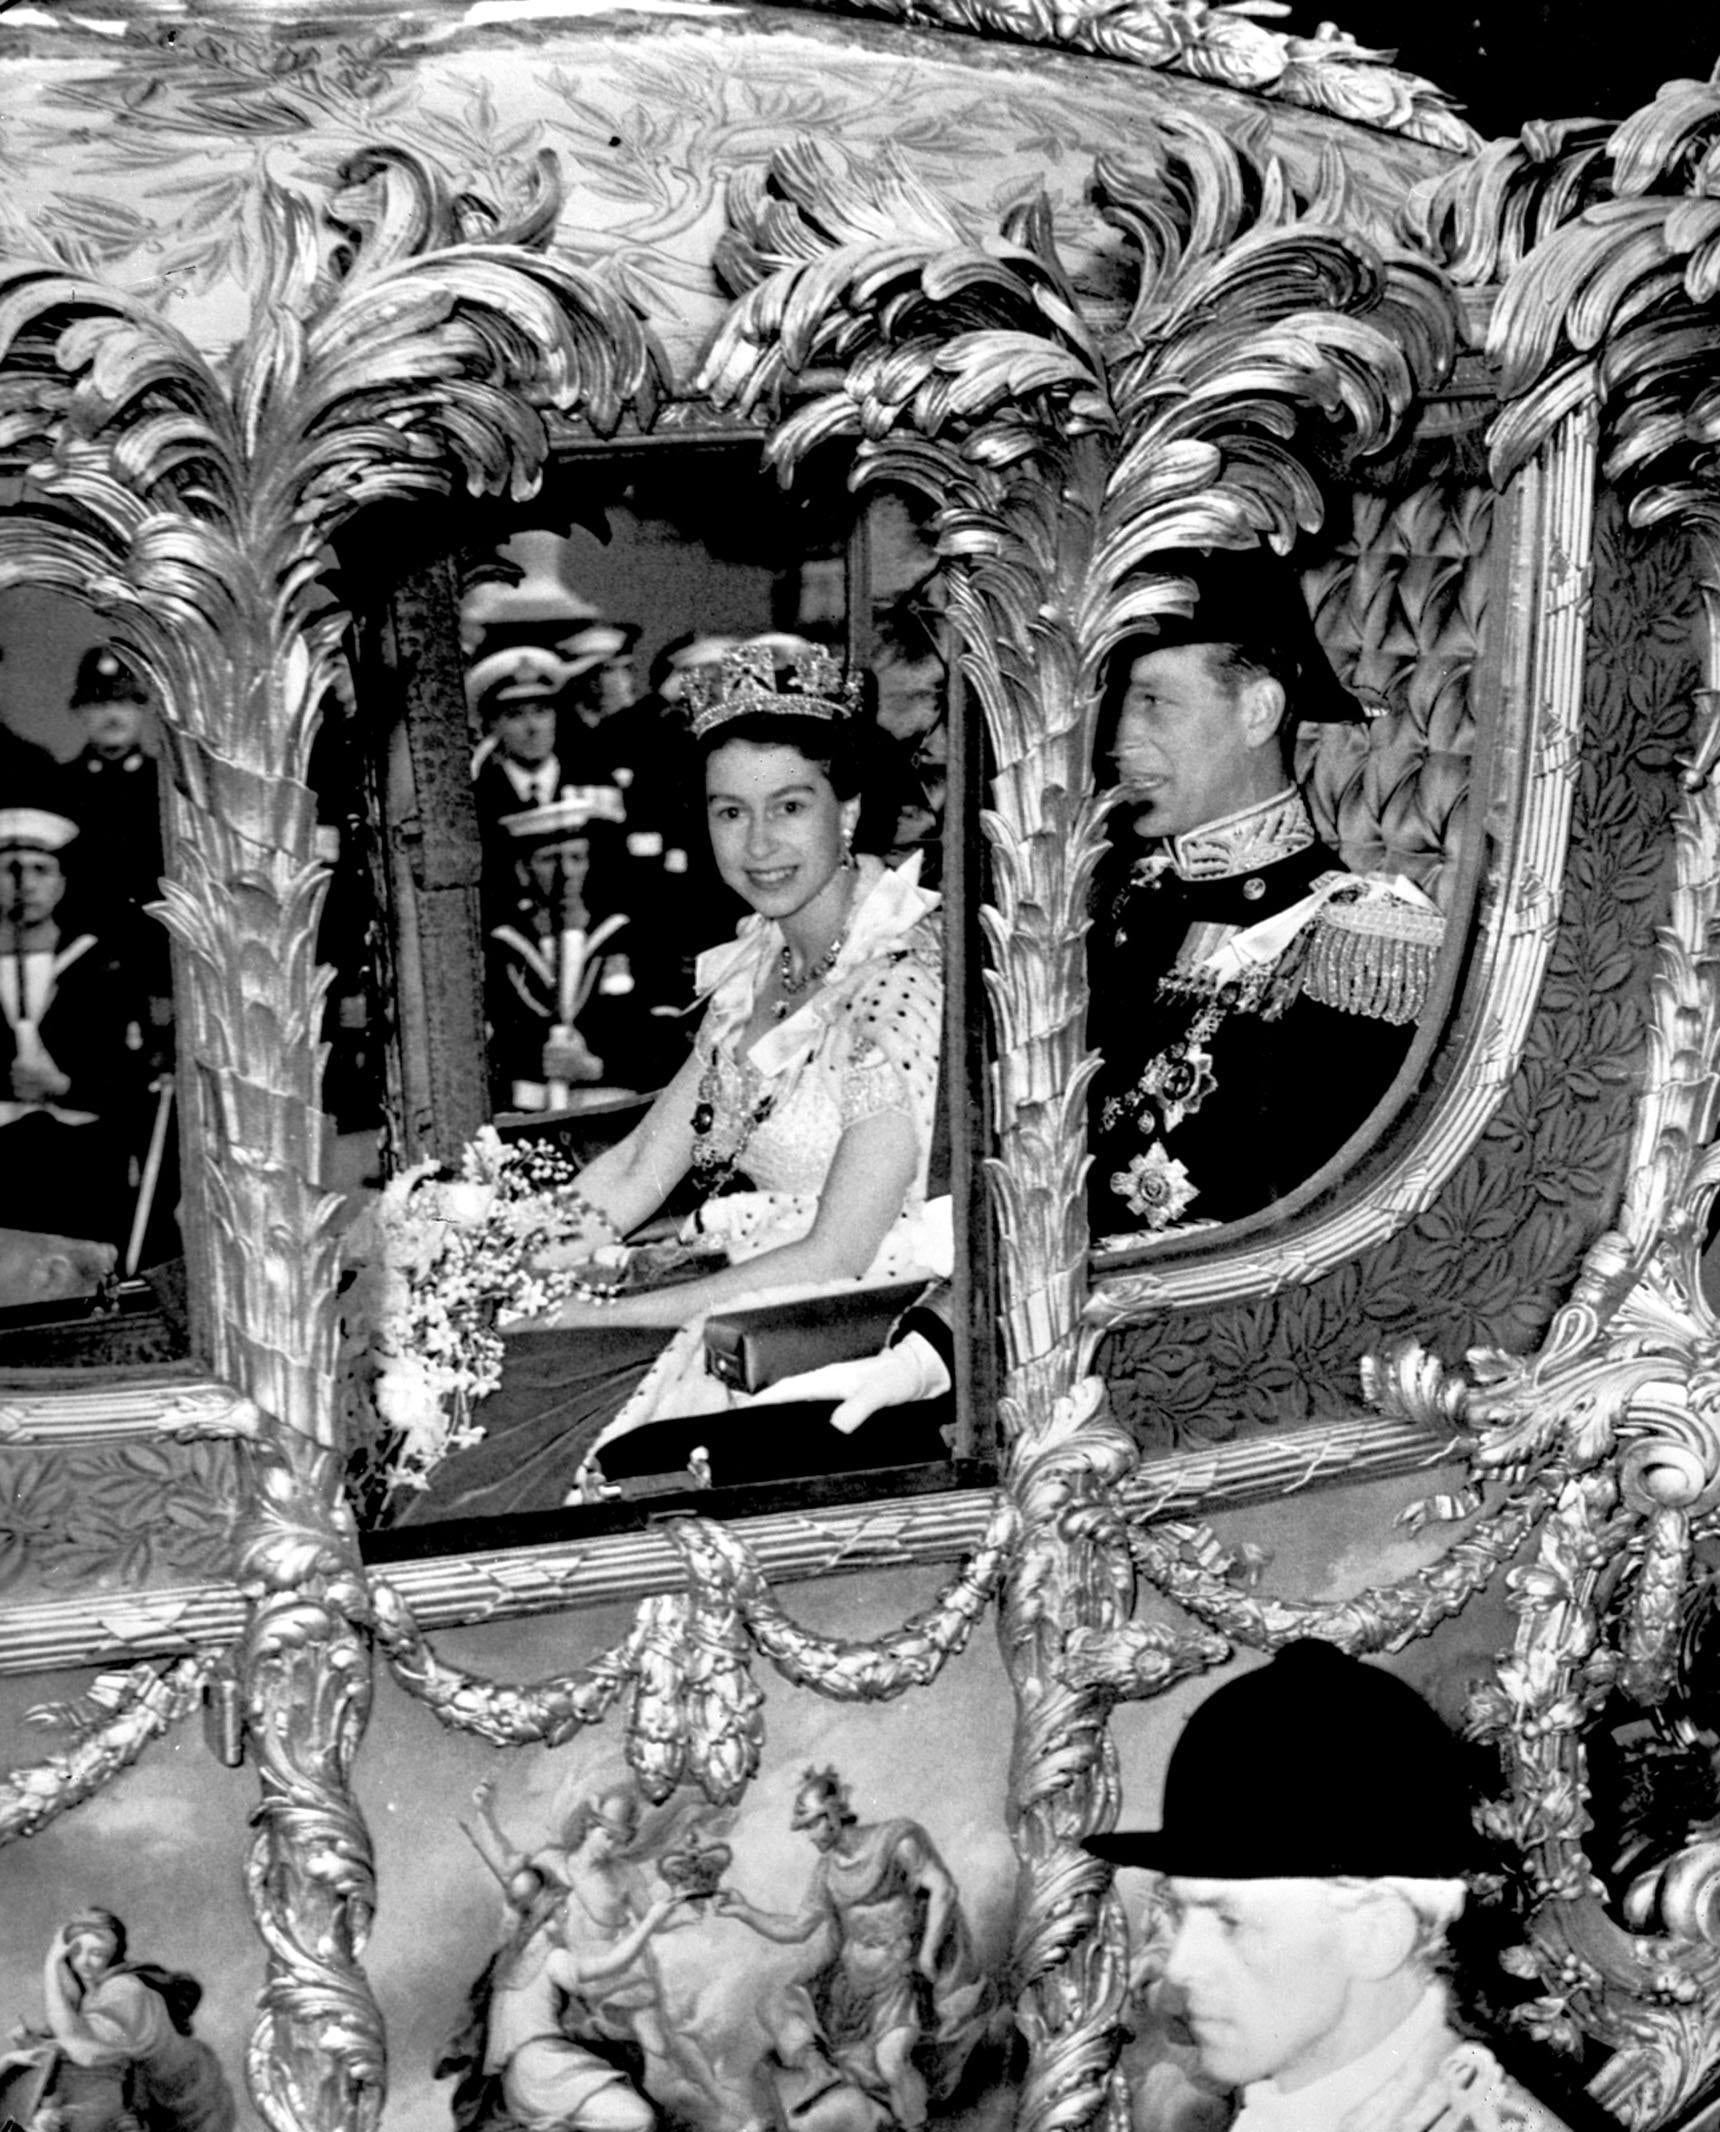 Queen Elizabeth II, accompanied by the Duke Of Edinburgh, in the Gold State Coach as it neared Trafalgar Square on the route to Westminster for her Coronation